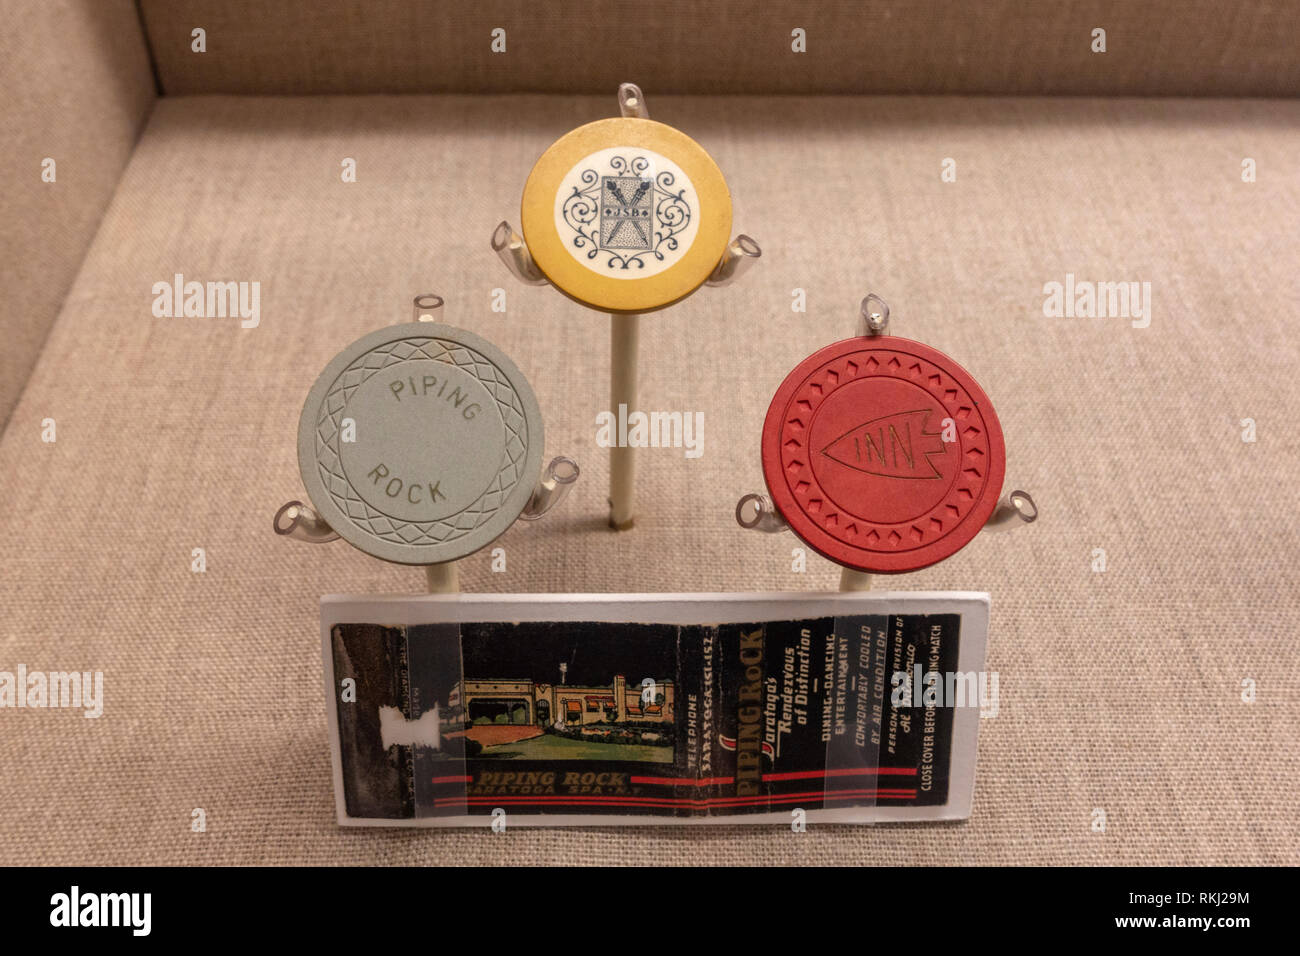 Casino chips and matchbook from Piping Rock and Arrowhead Inn, The Mob Museum, Las Vegas (City of Las Vegas), Nevada, United States. Stock Photo